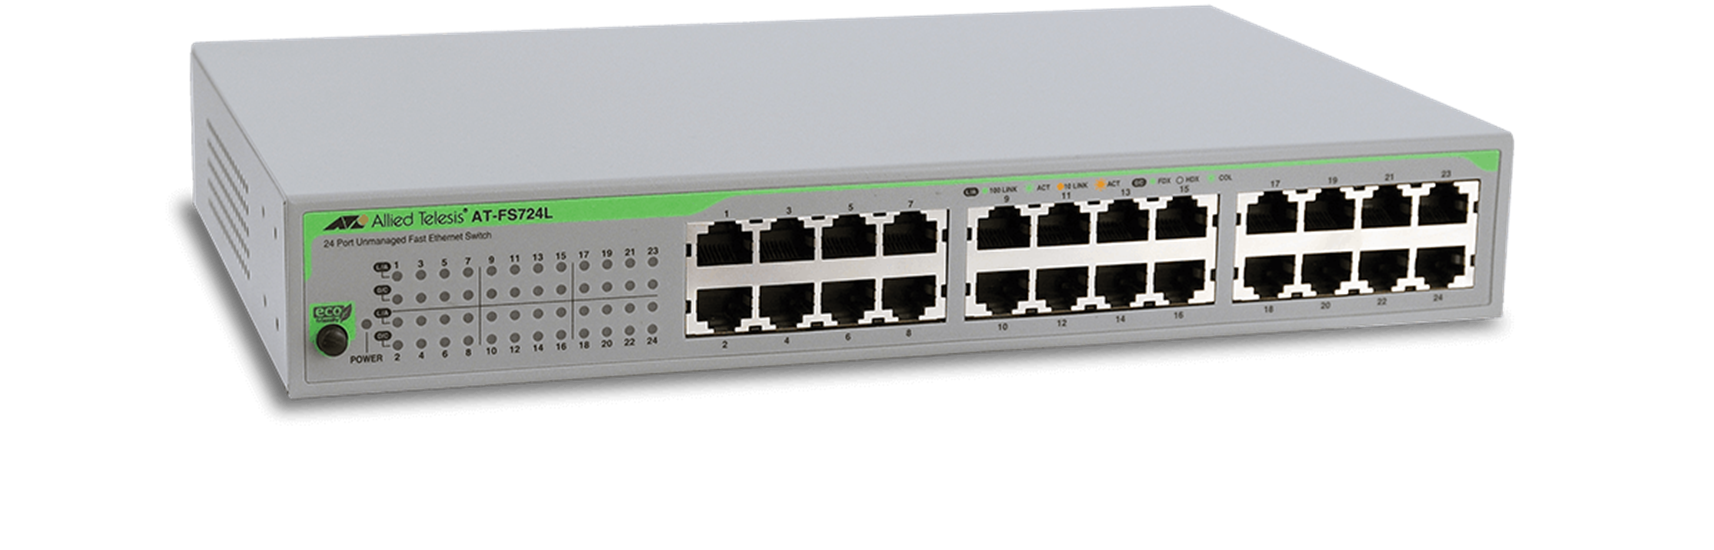 AT-FS700 Series - Unmanaged Fast Ethernet Switch